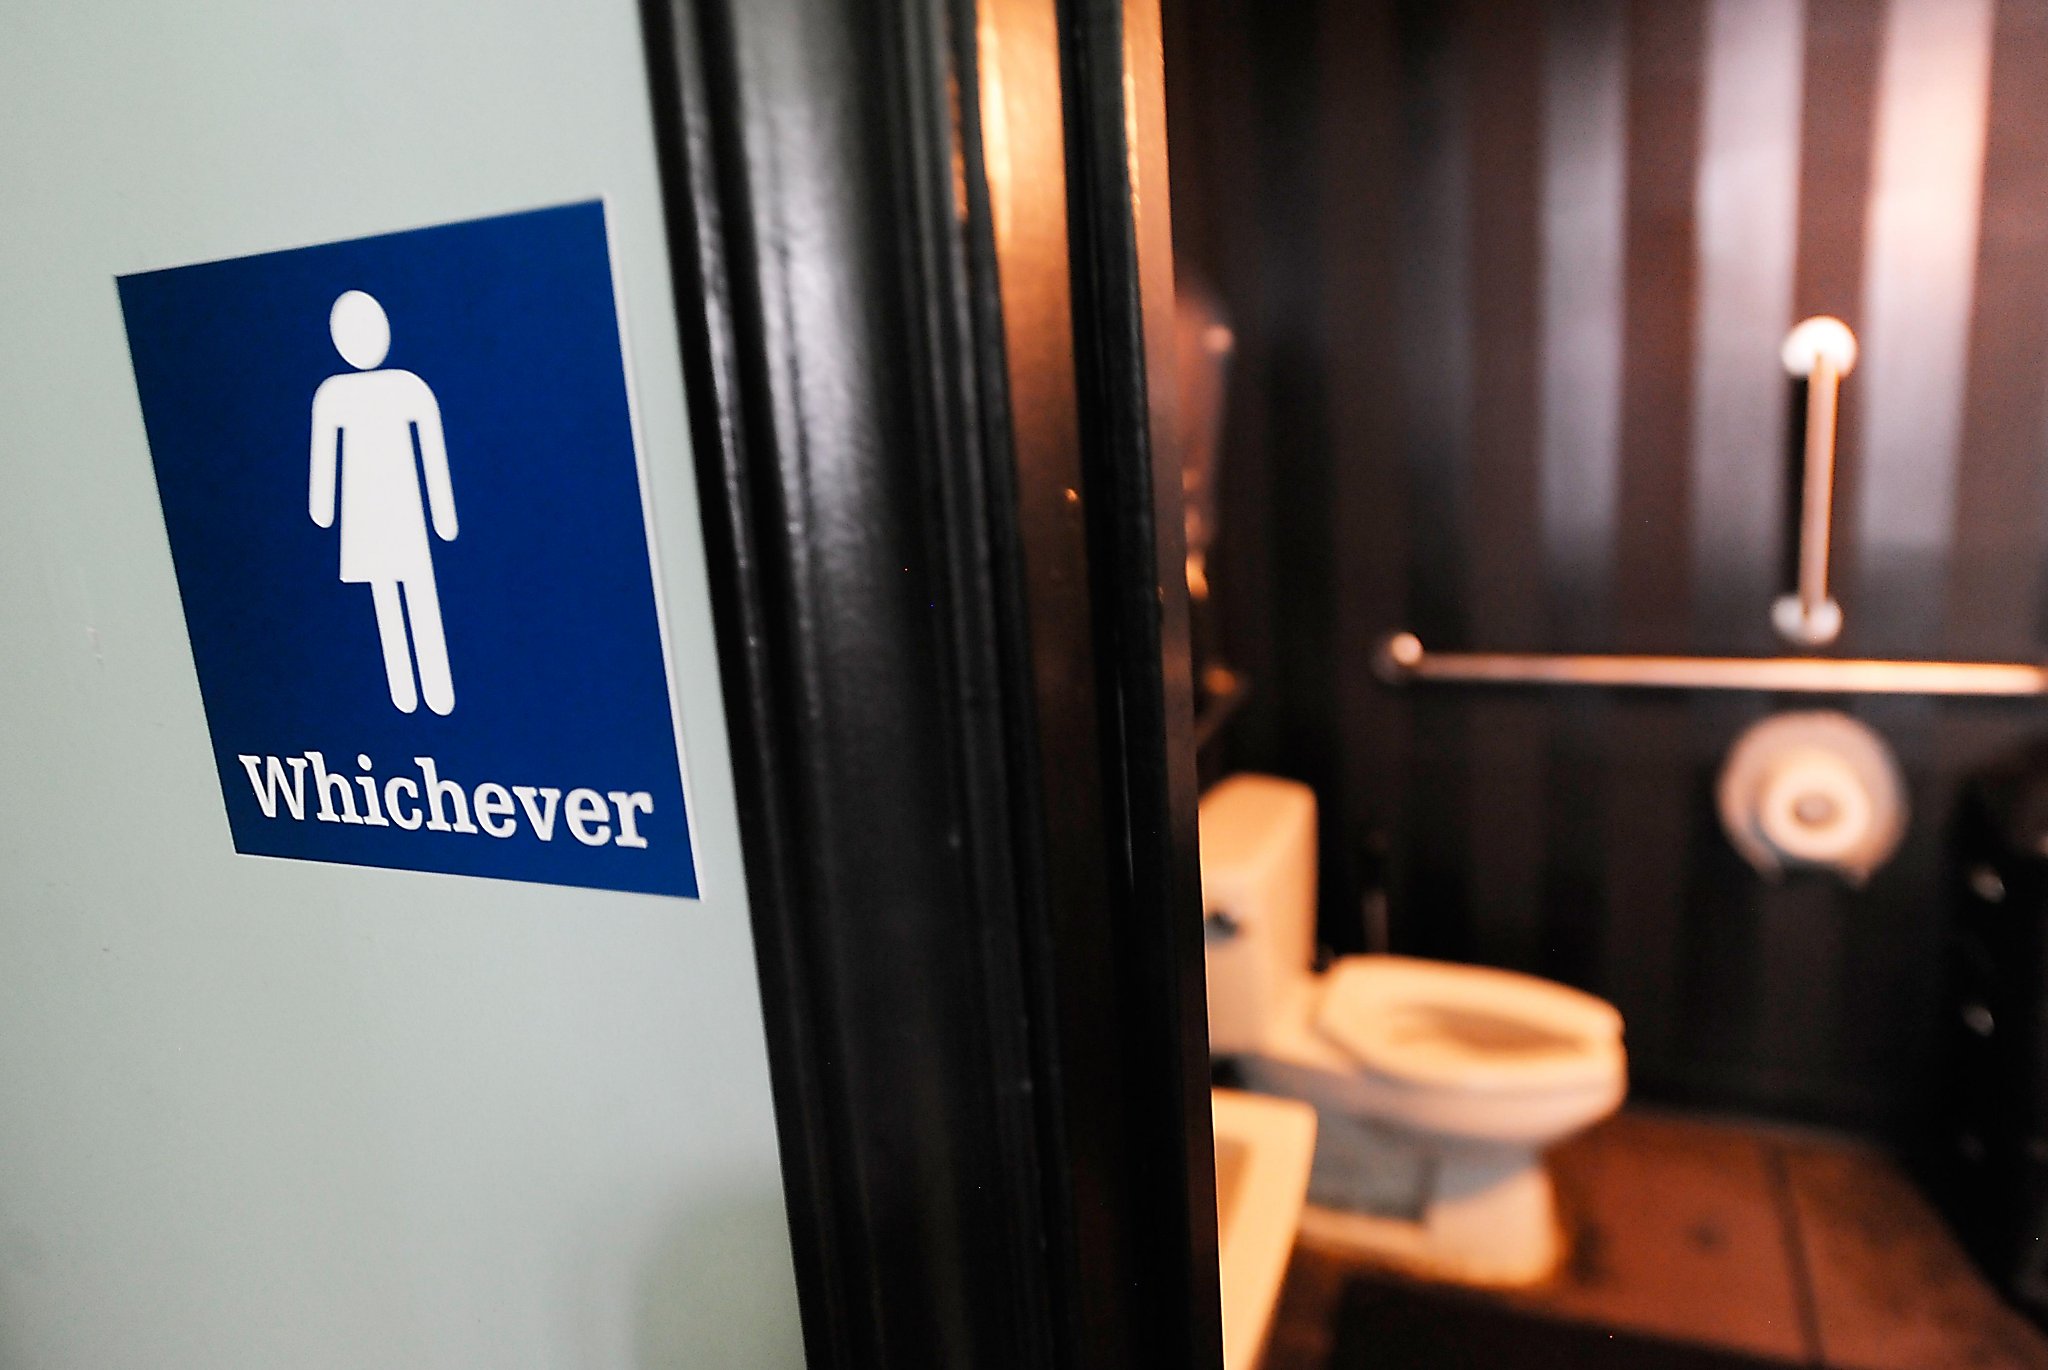 New State Law Makes Single Stall Bathrooms Open To All Genders